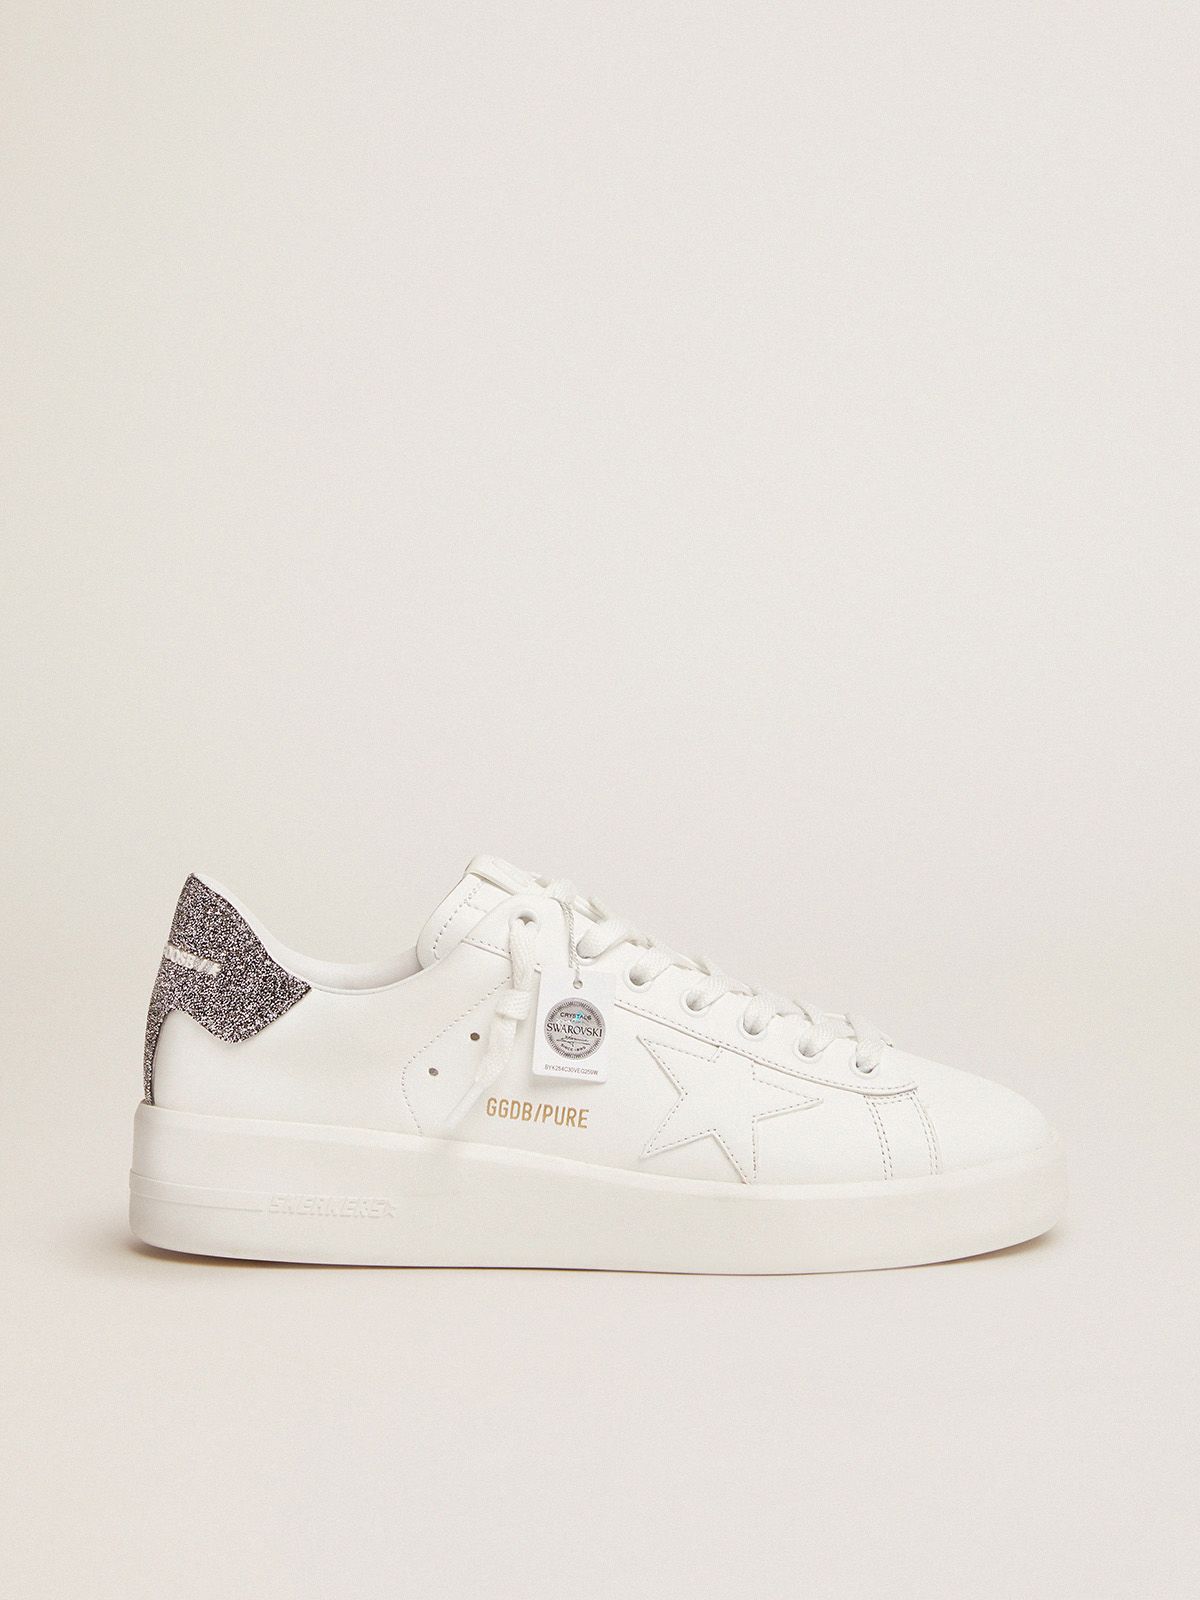 golden goose silver white Purestar sneakers in tab crystal heel leather with